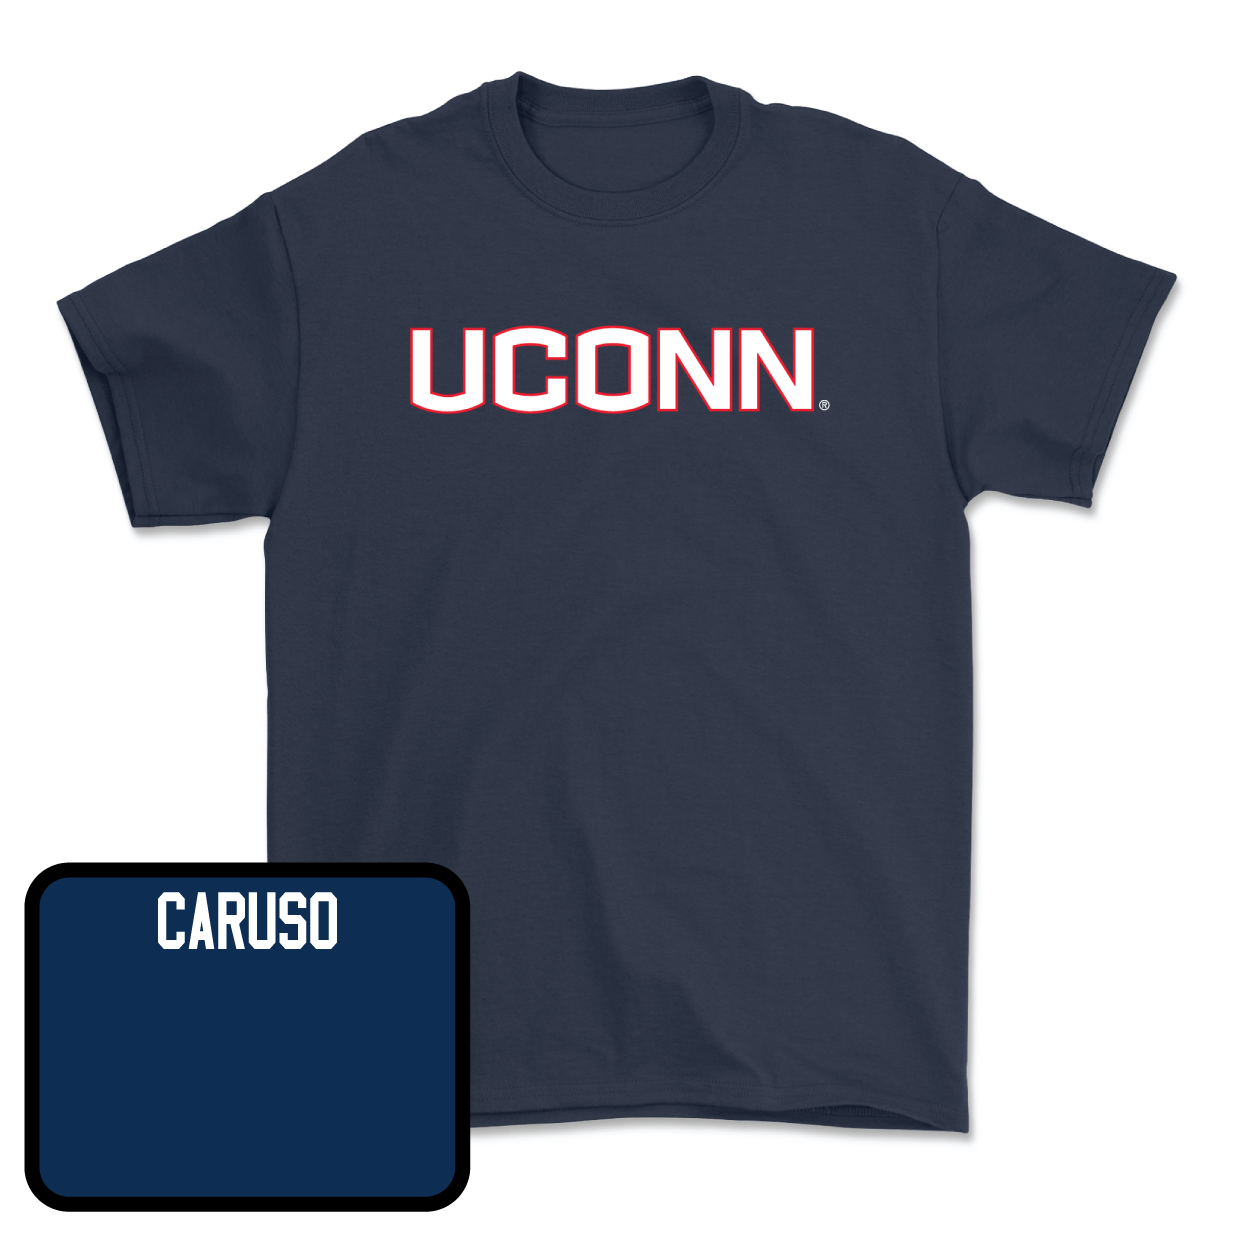 Navy Women's Rowing UConn Tee X-Large / Riley Caruso